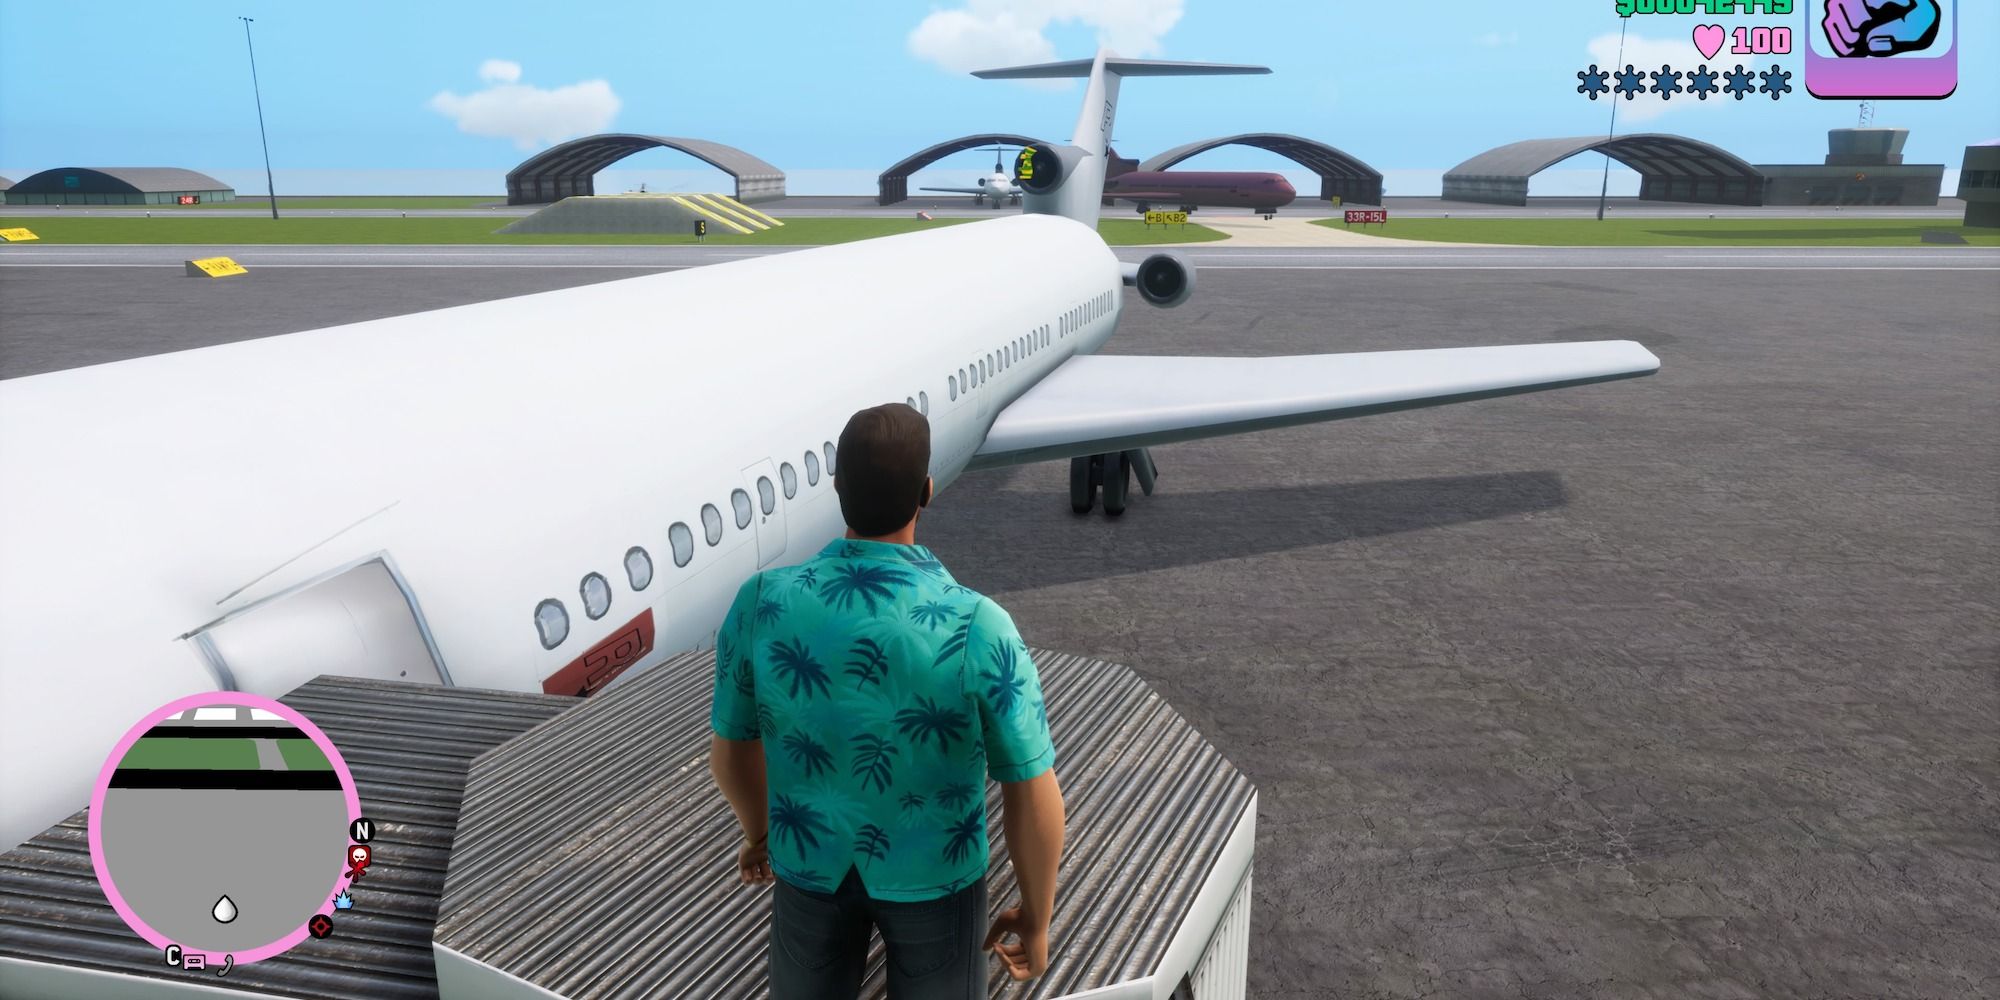 vice city hidden package on top of plane